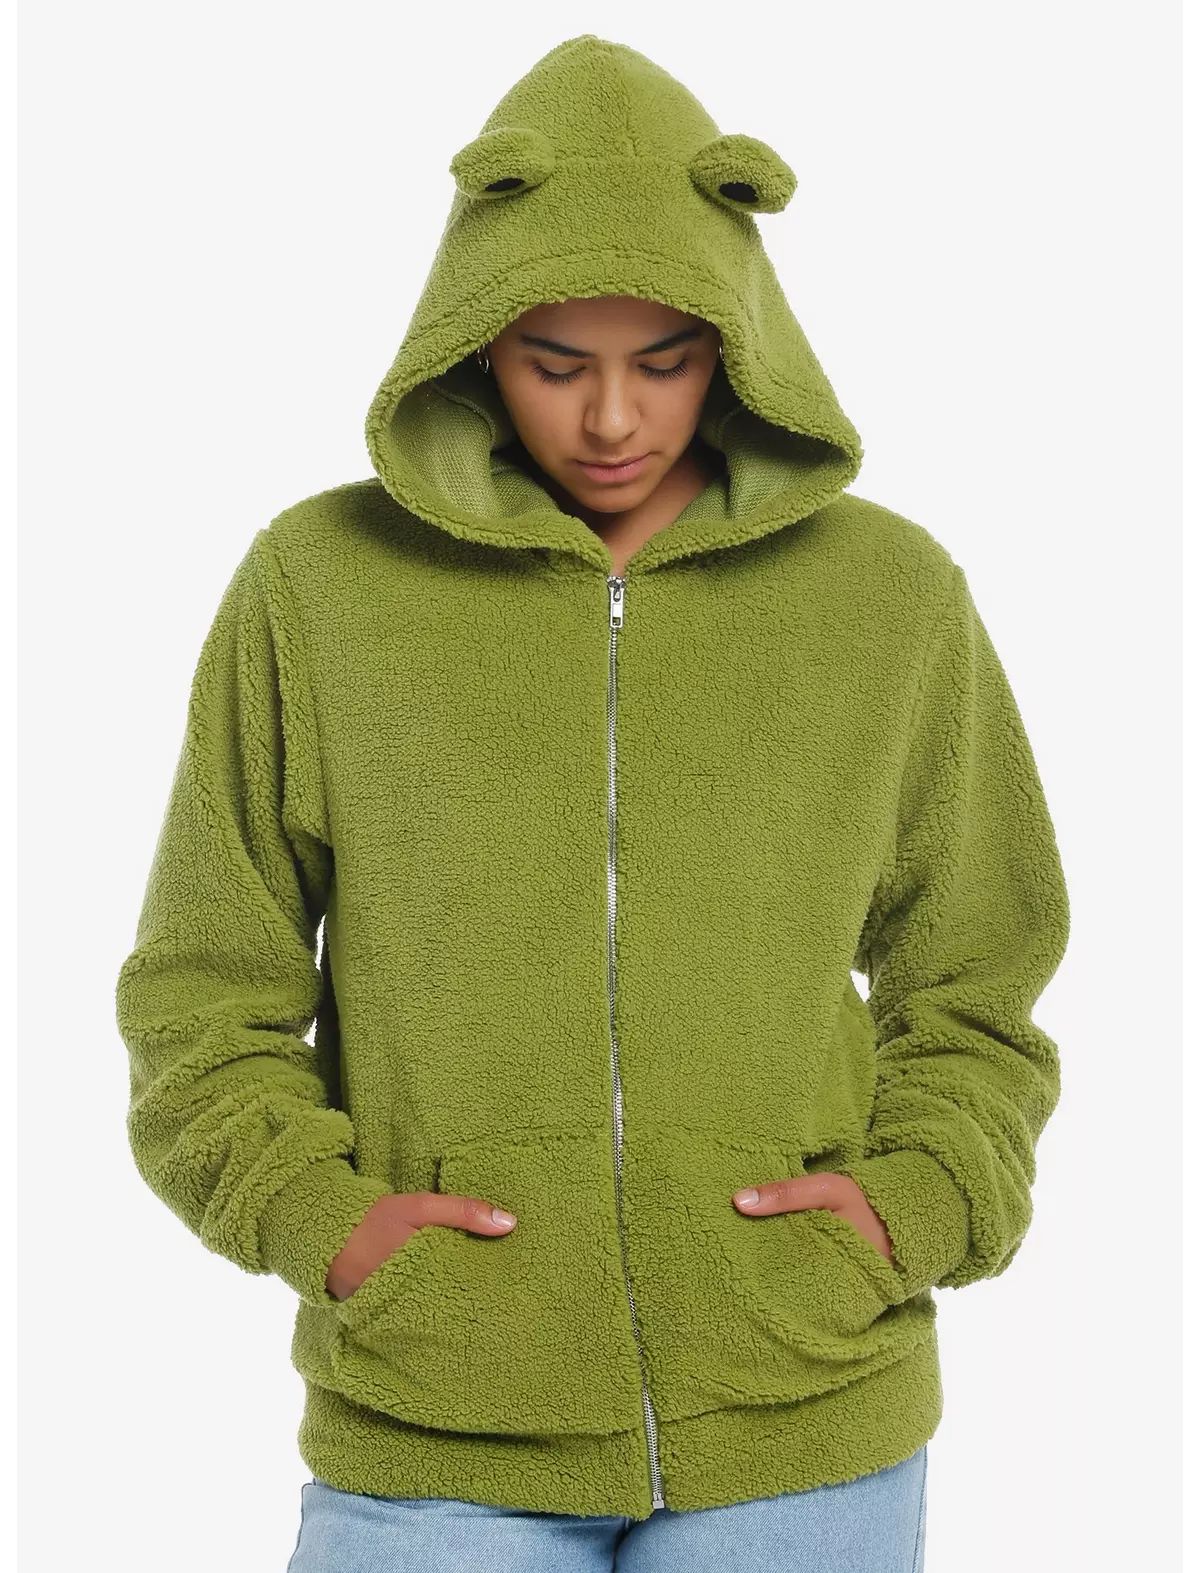 Thorn & Fable Frog Sherpa Girls Hoodie | Hot Topic